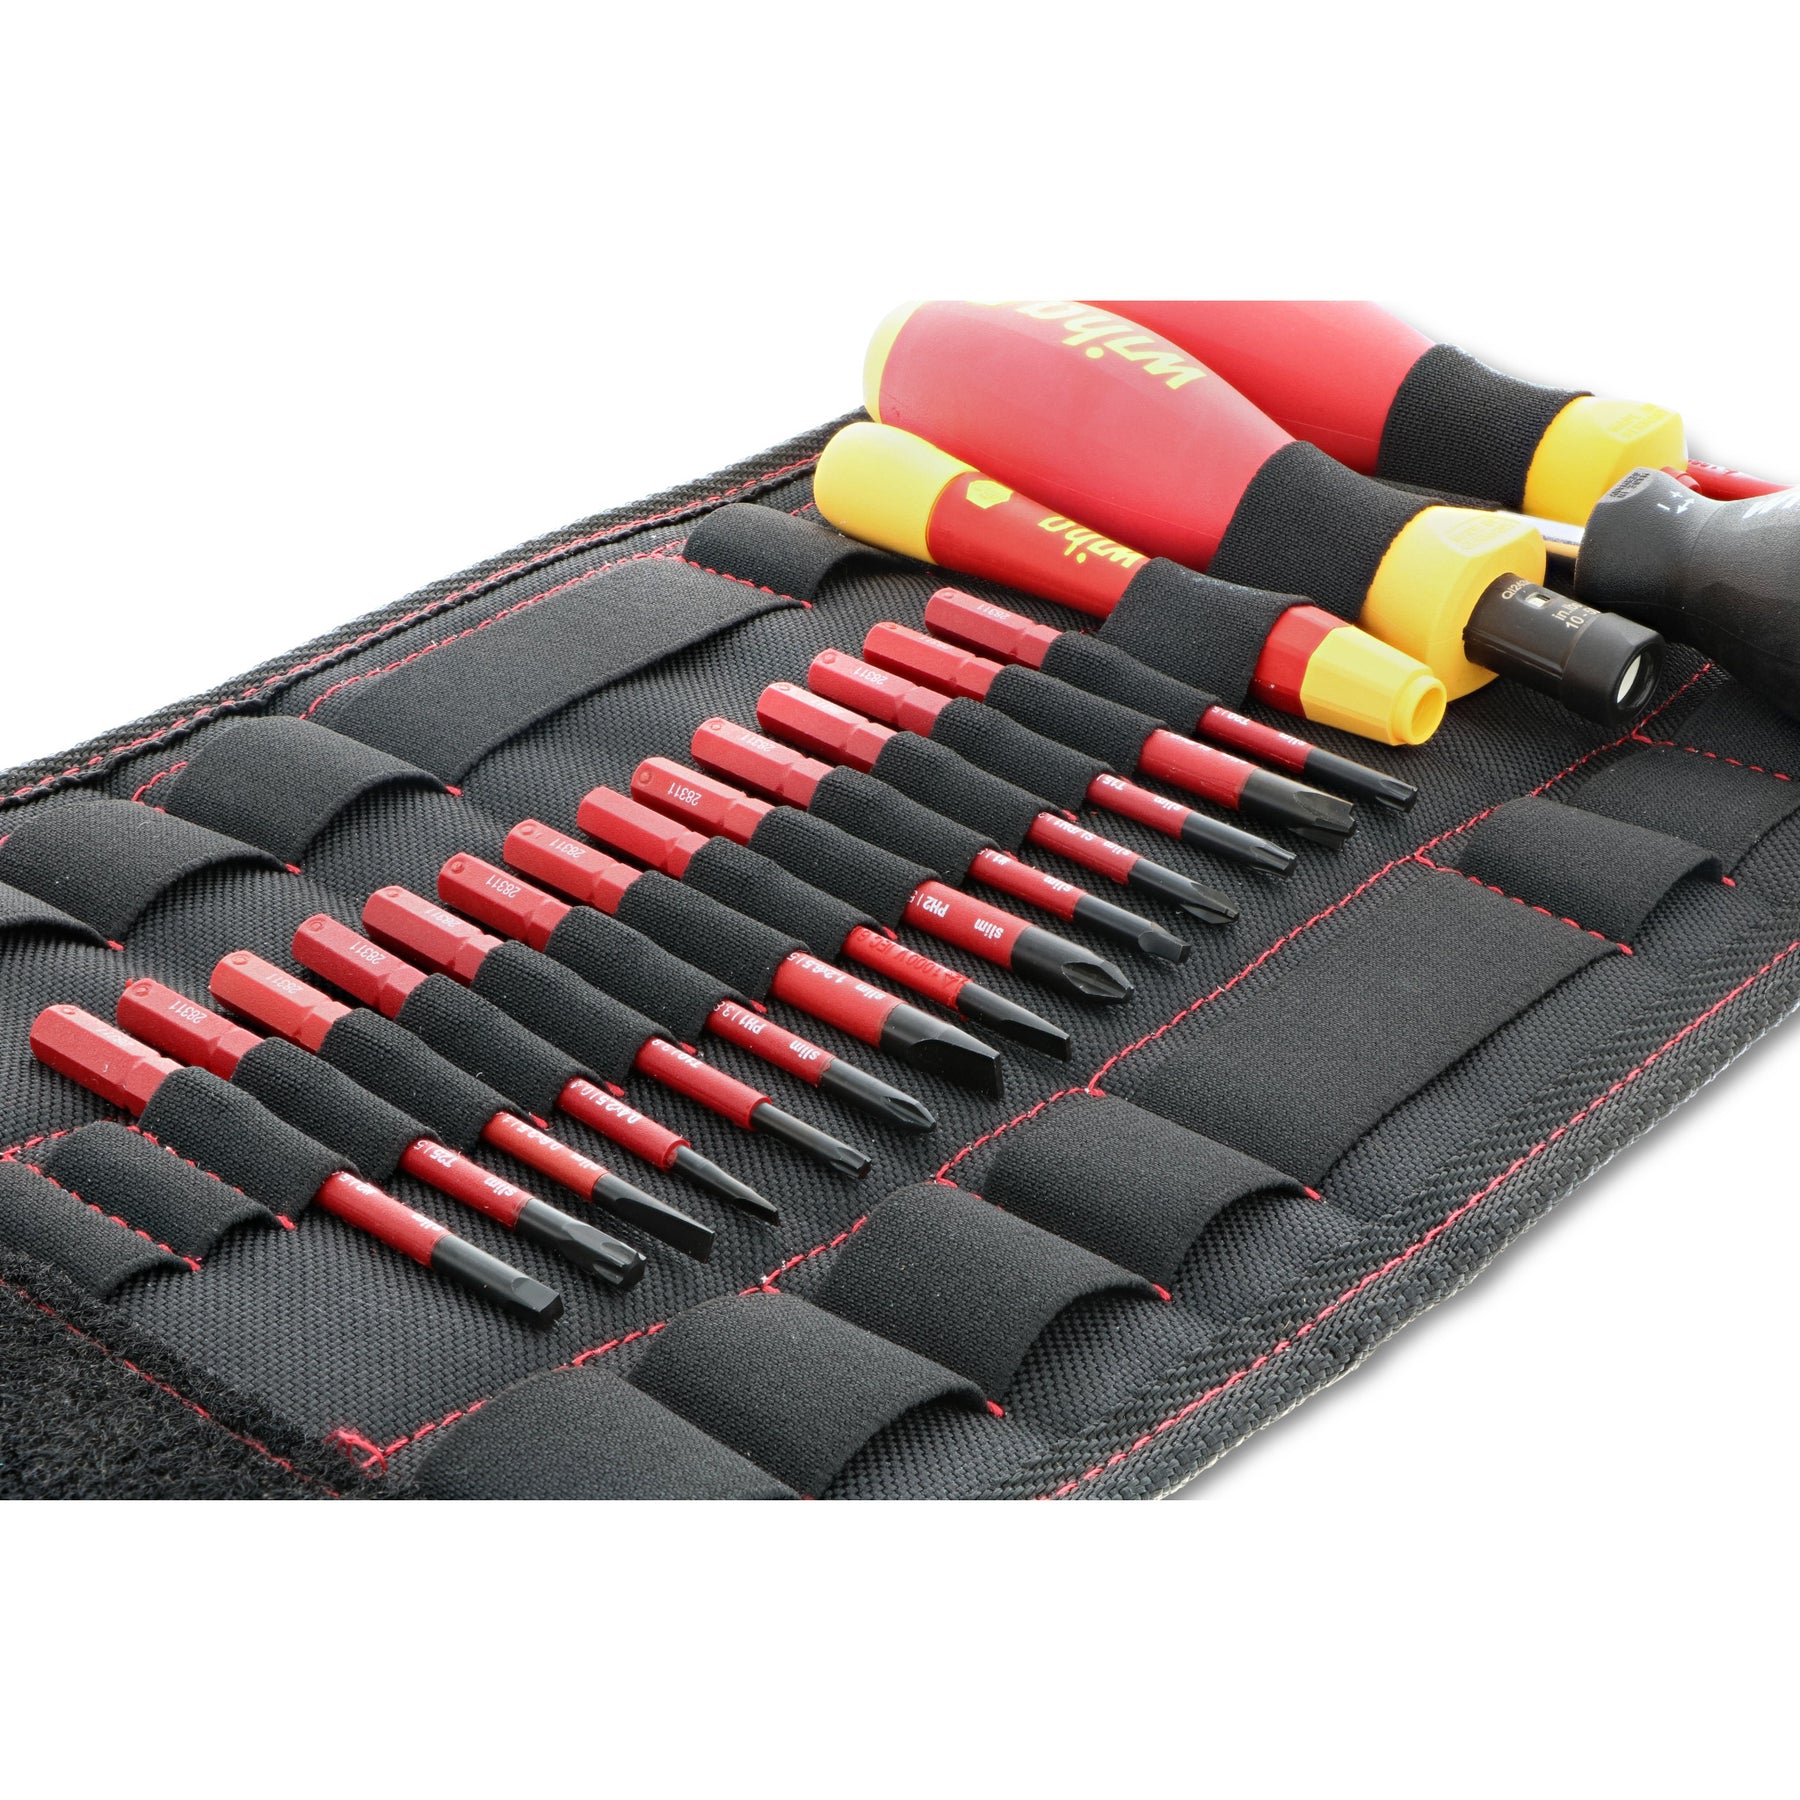 20 Piece Insulated TorqueVario-S (10-50 In/lbs) and SlimLine Blade Set